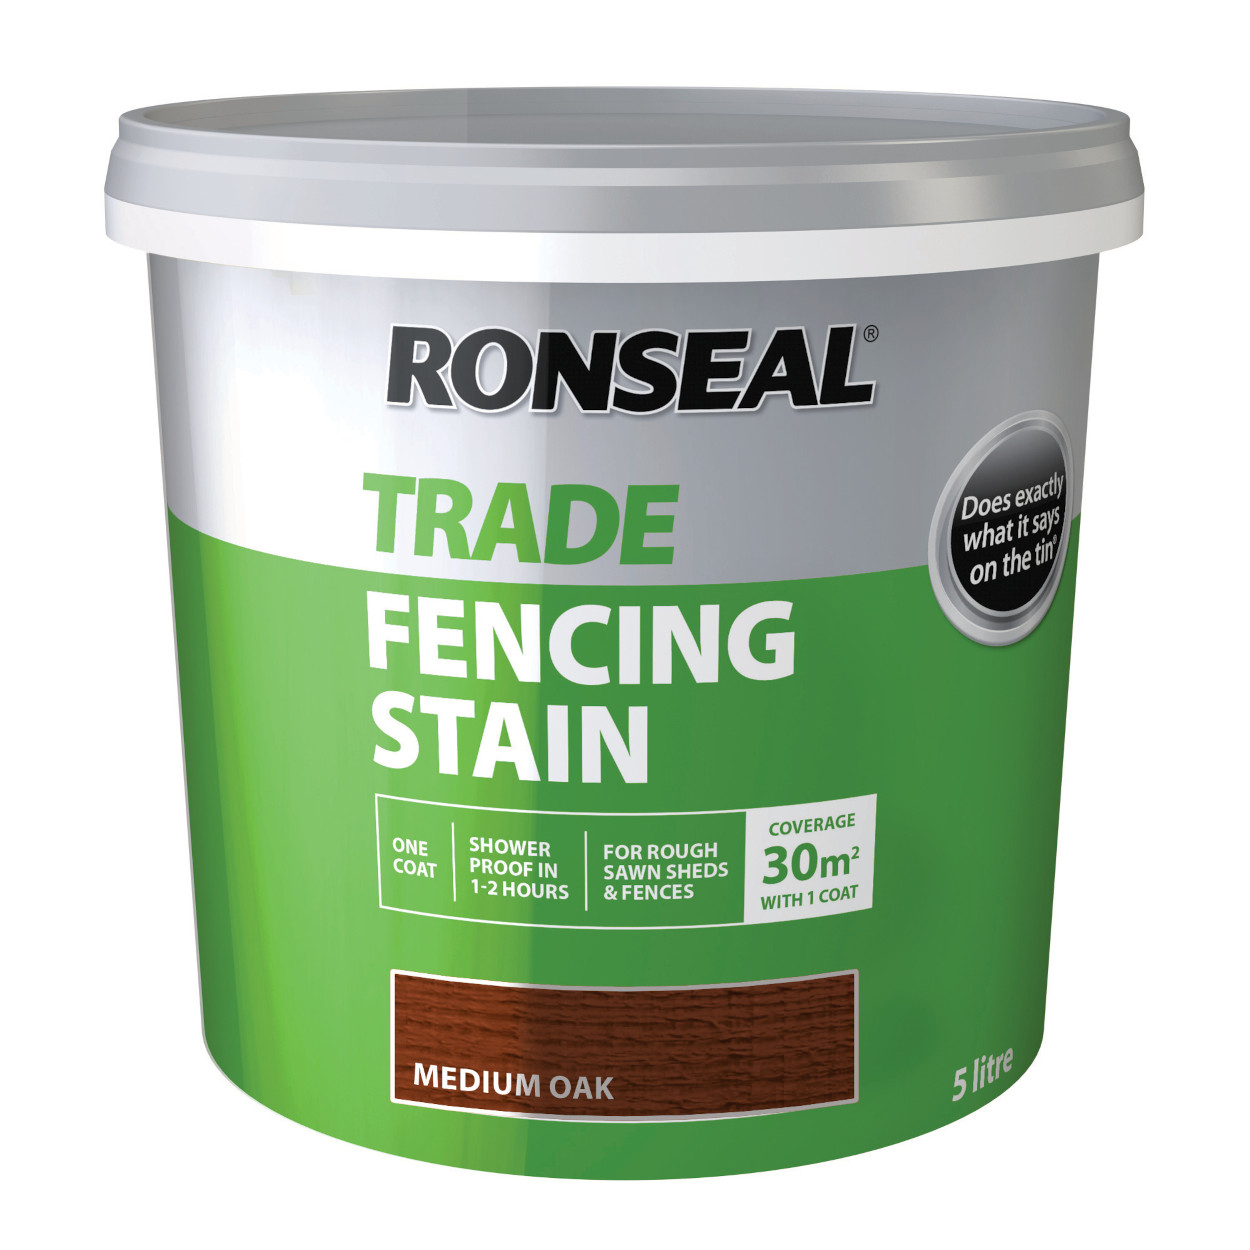 Photograph of Ronseal Trade Fencing Stain Medium Oak 5L